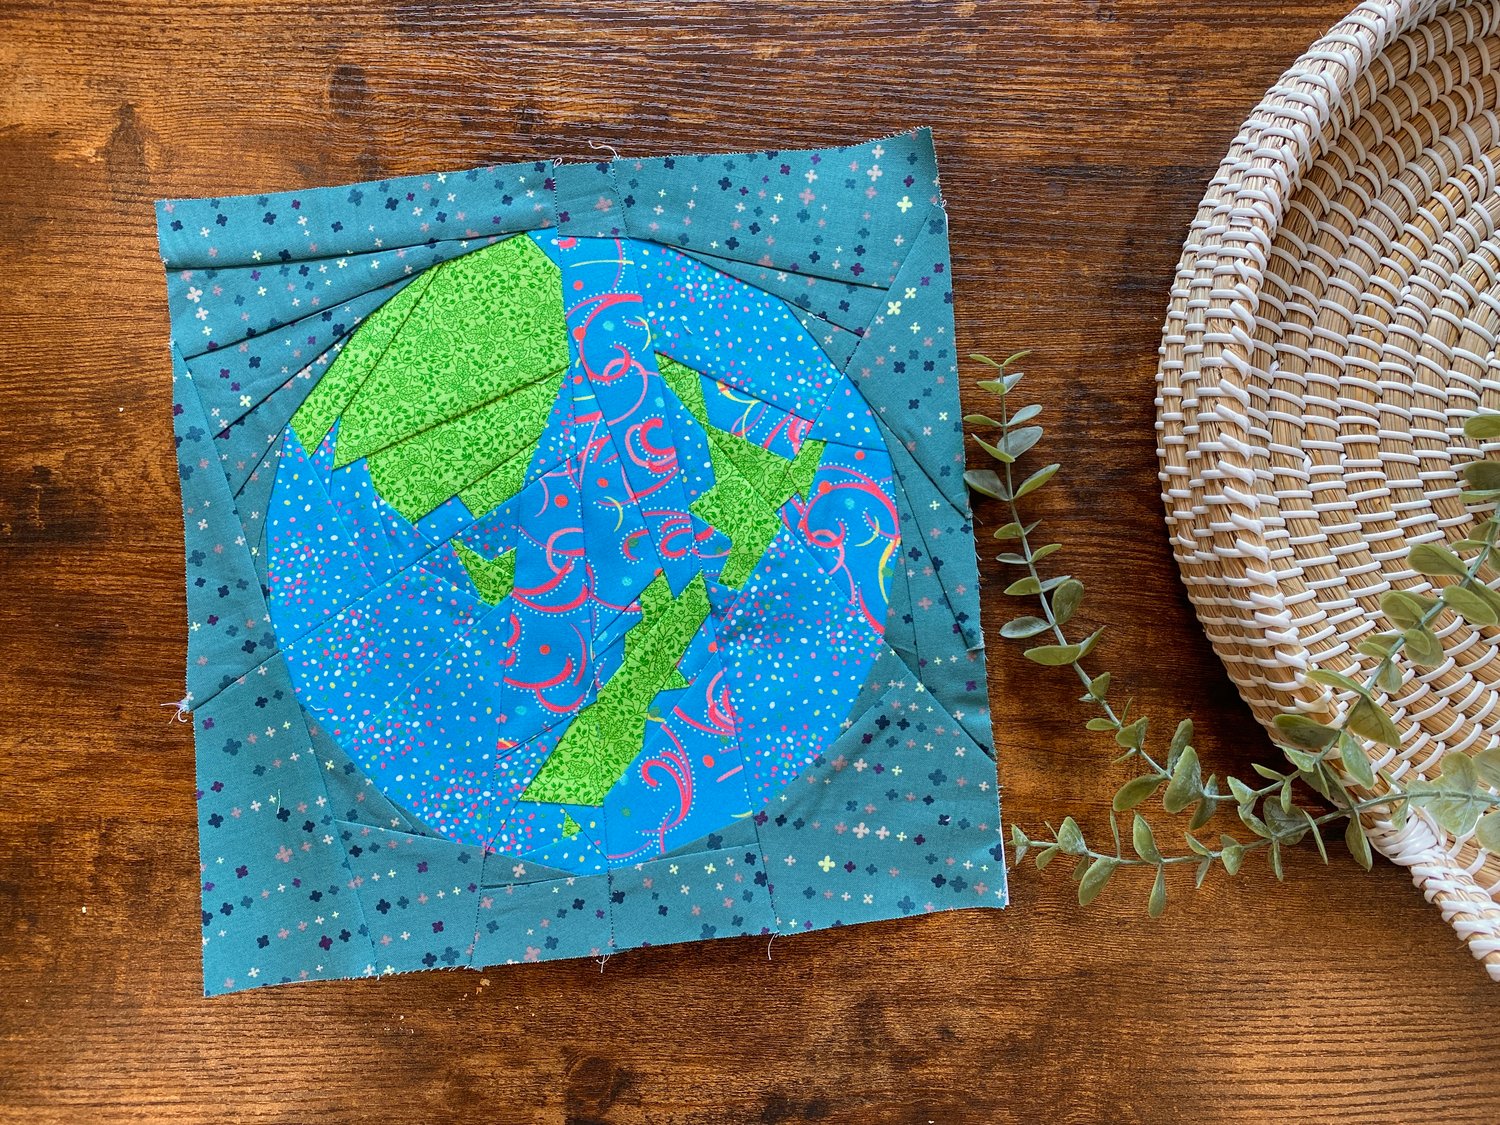 This is a photo of the finished paper pieced quilt block. Although I ran out of the blue fabric I had chosen, you can still see the contrast between the land and the sea on the Planet Earth,